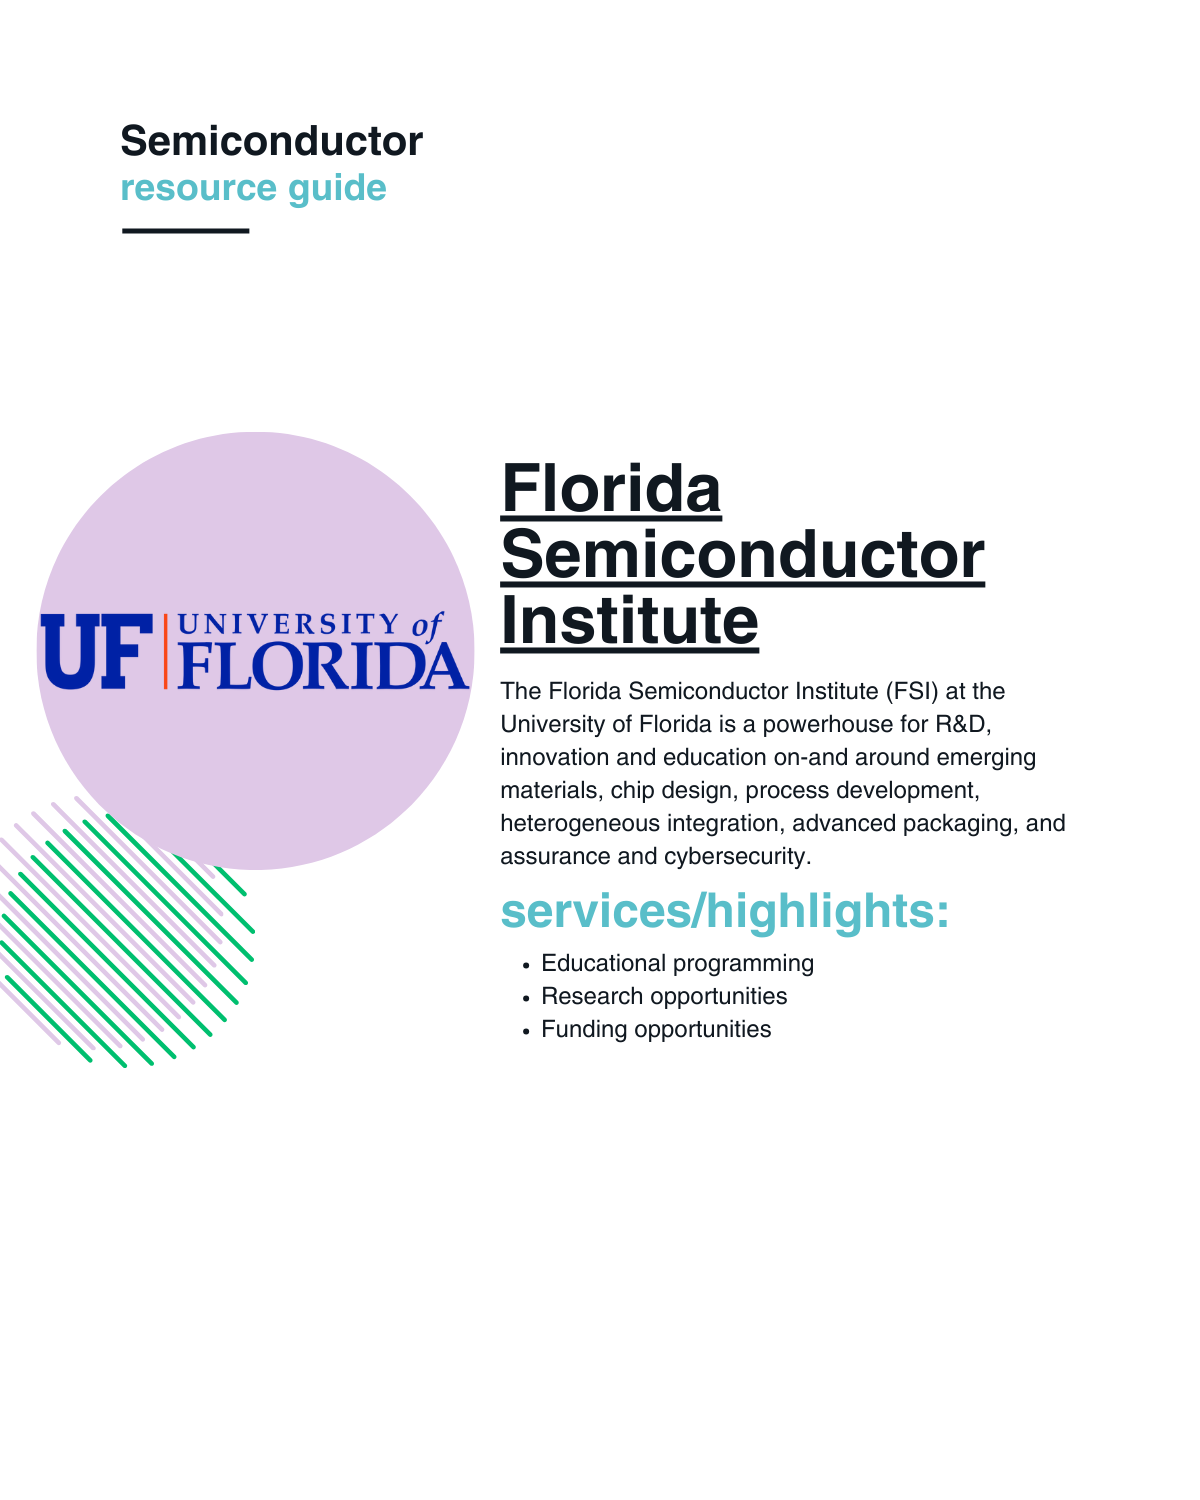 The Florida Semiconductor Institute (FSI) at the University of Florida is a powerhouse for R&D, innovation and education on-and around emerging materials, chip design, process development, heterogeneous integration, advanced packaging, and assurance and cybersecurity.